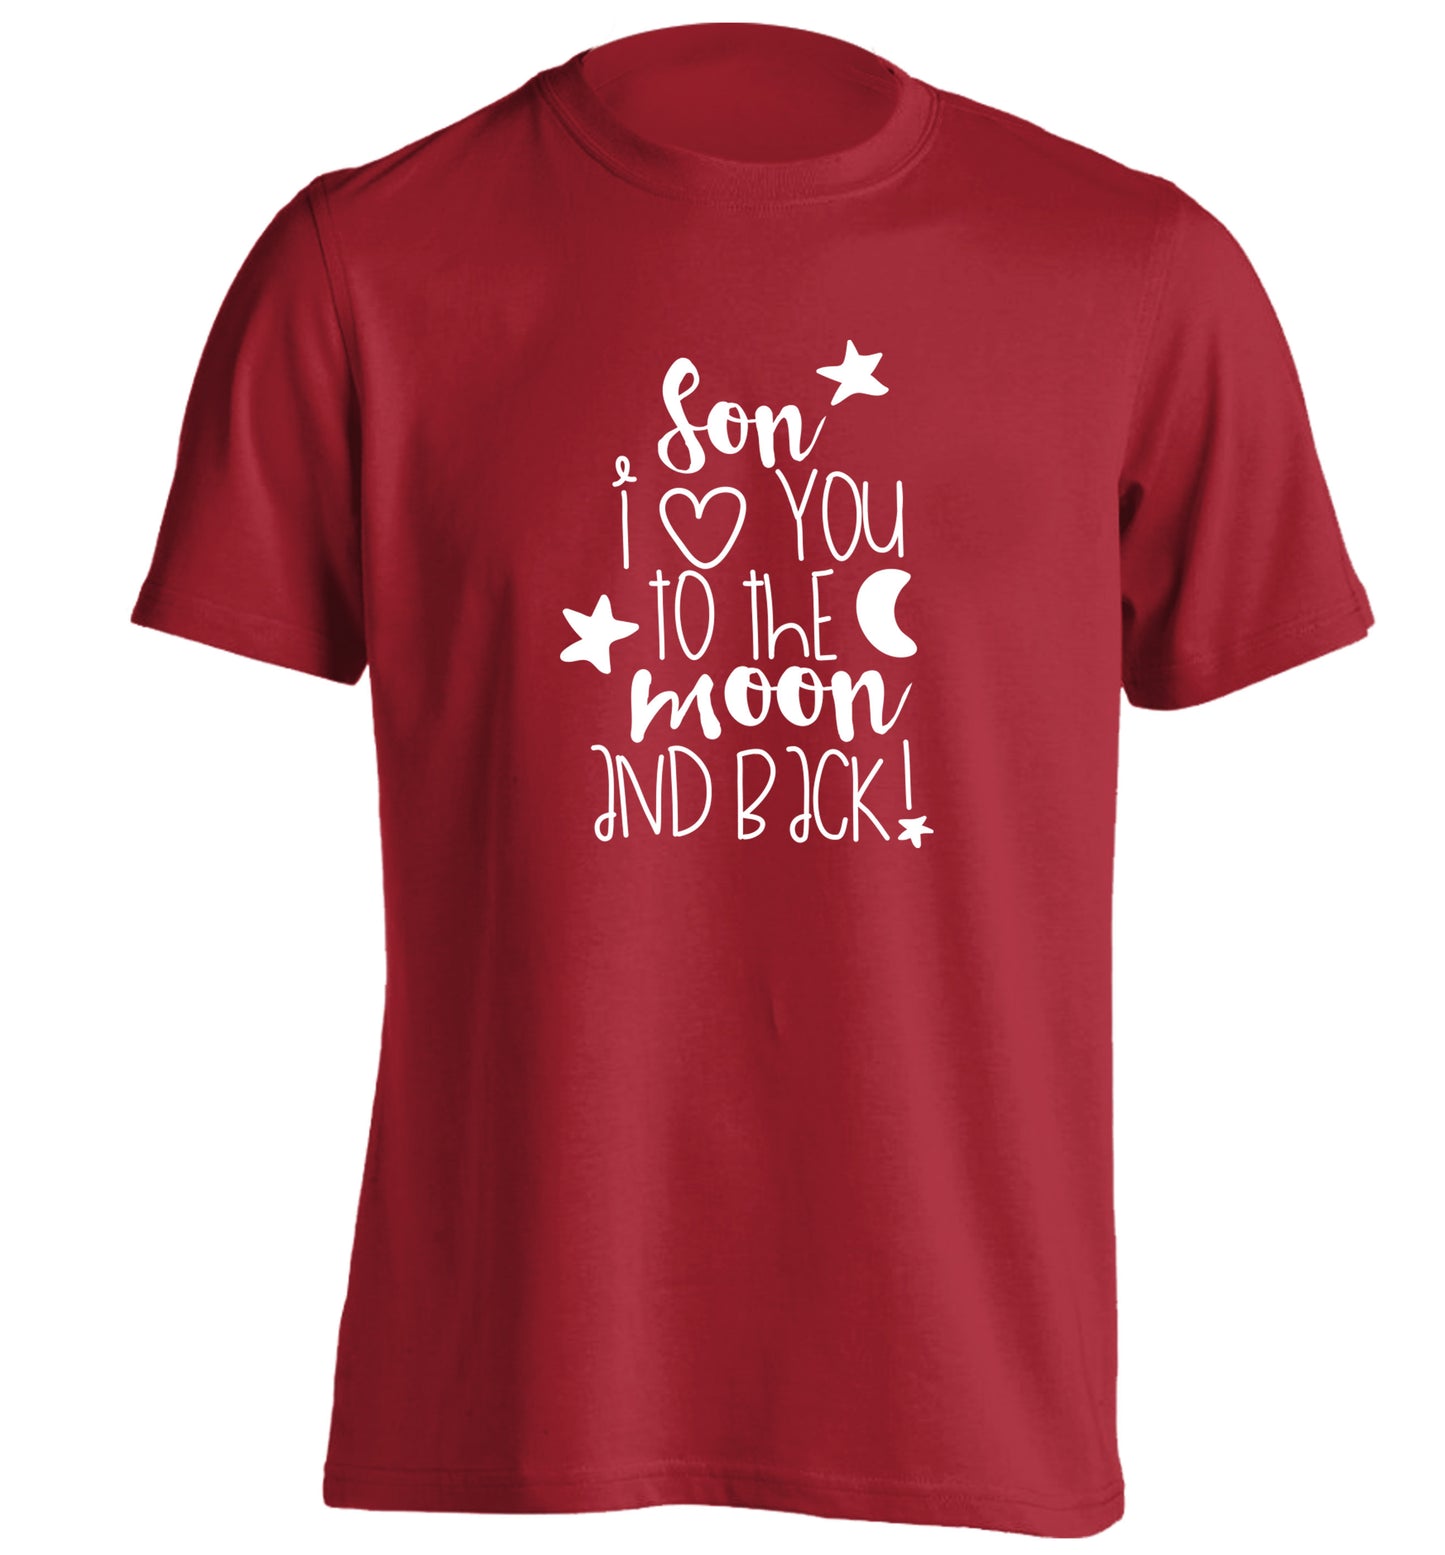 Son I love you to the moon and back adults unisex red Tshirt 2XL